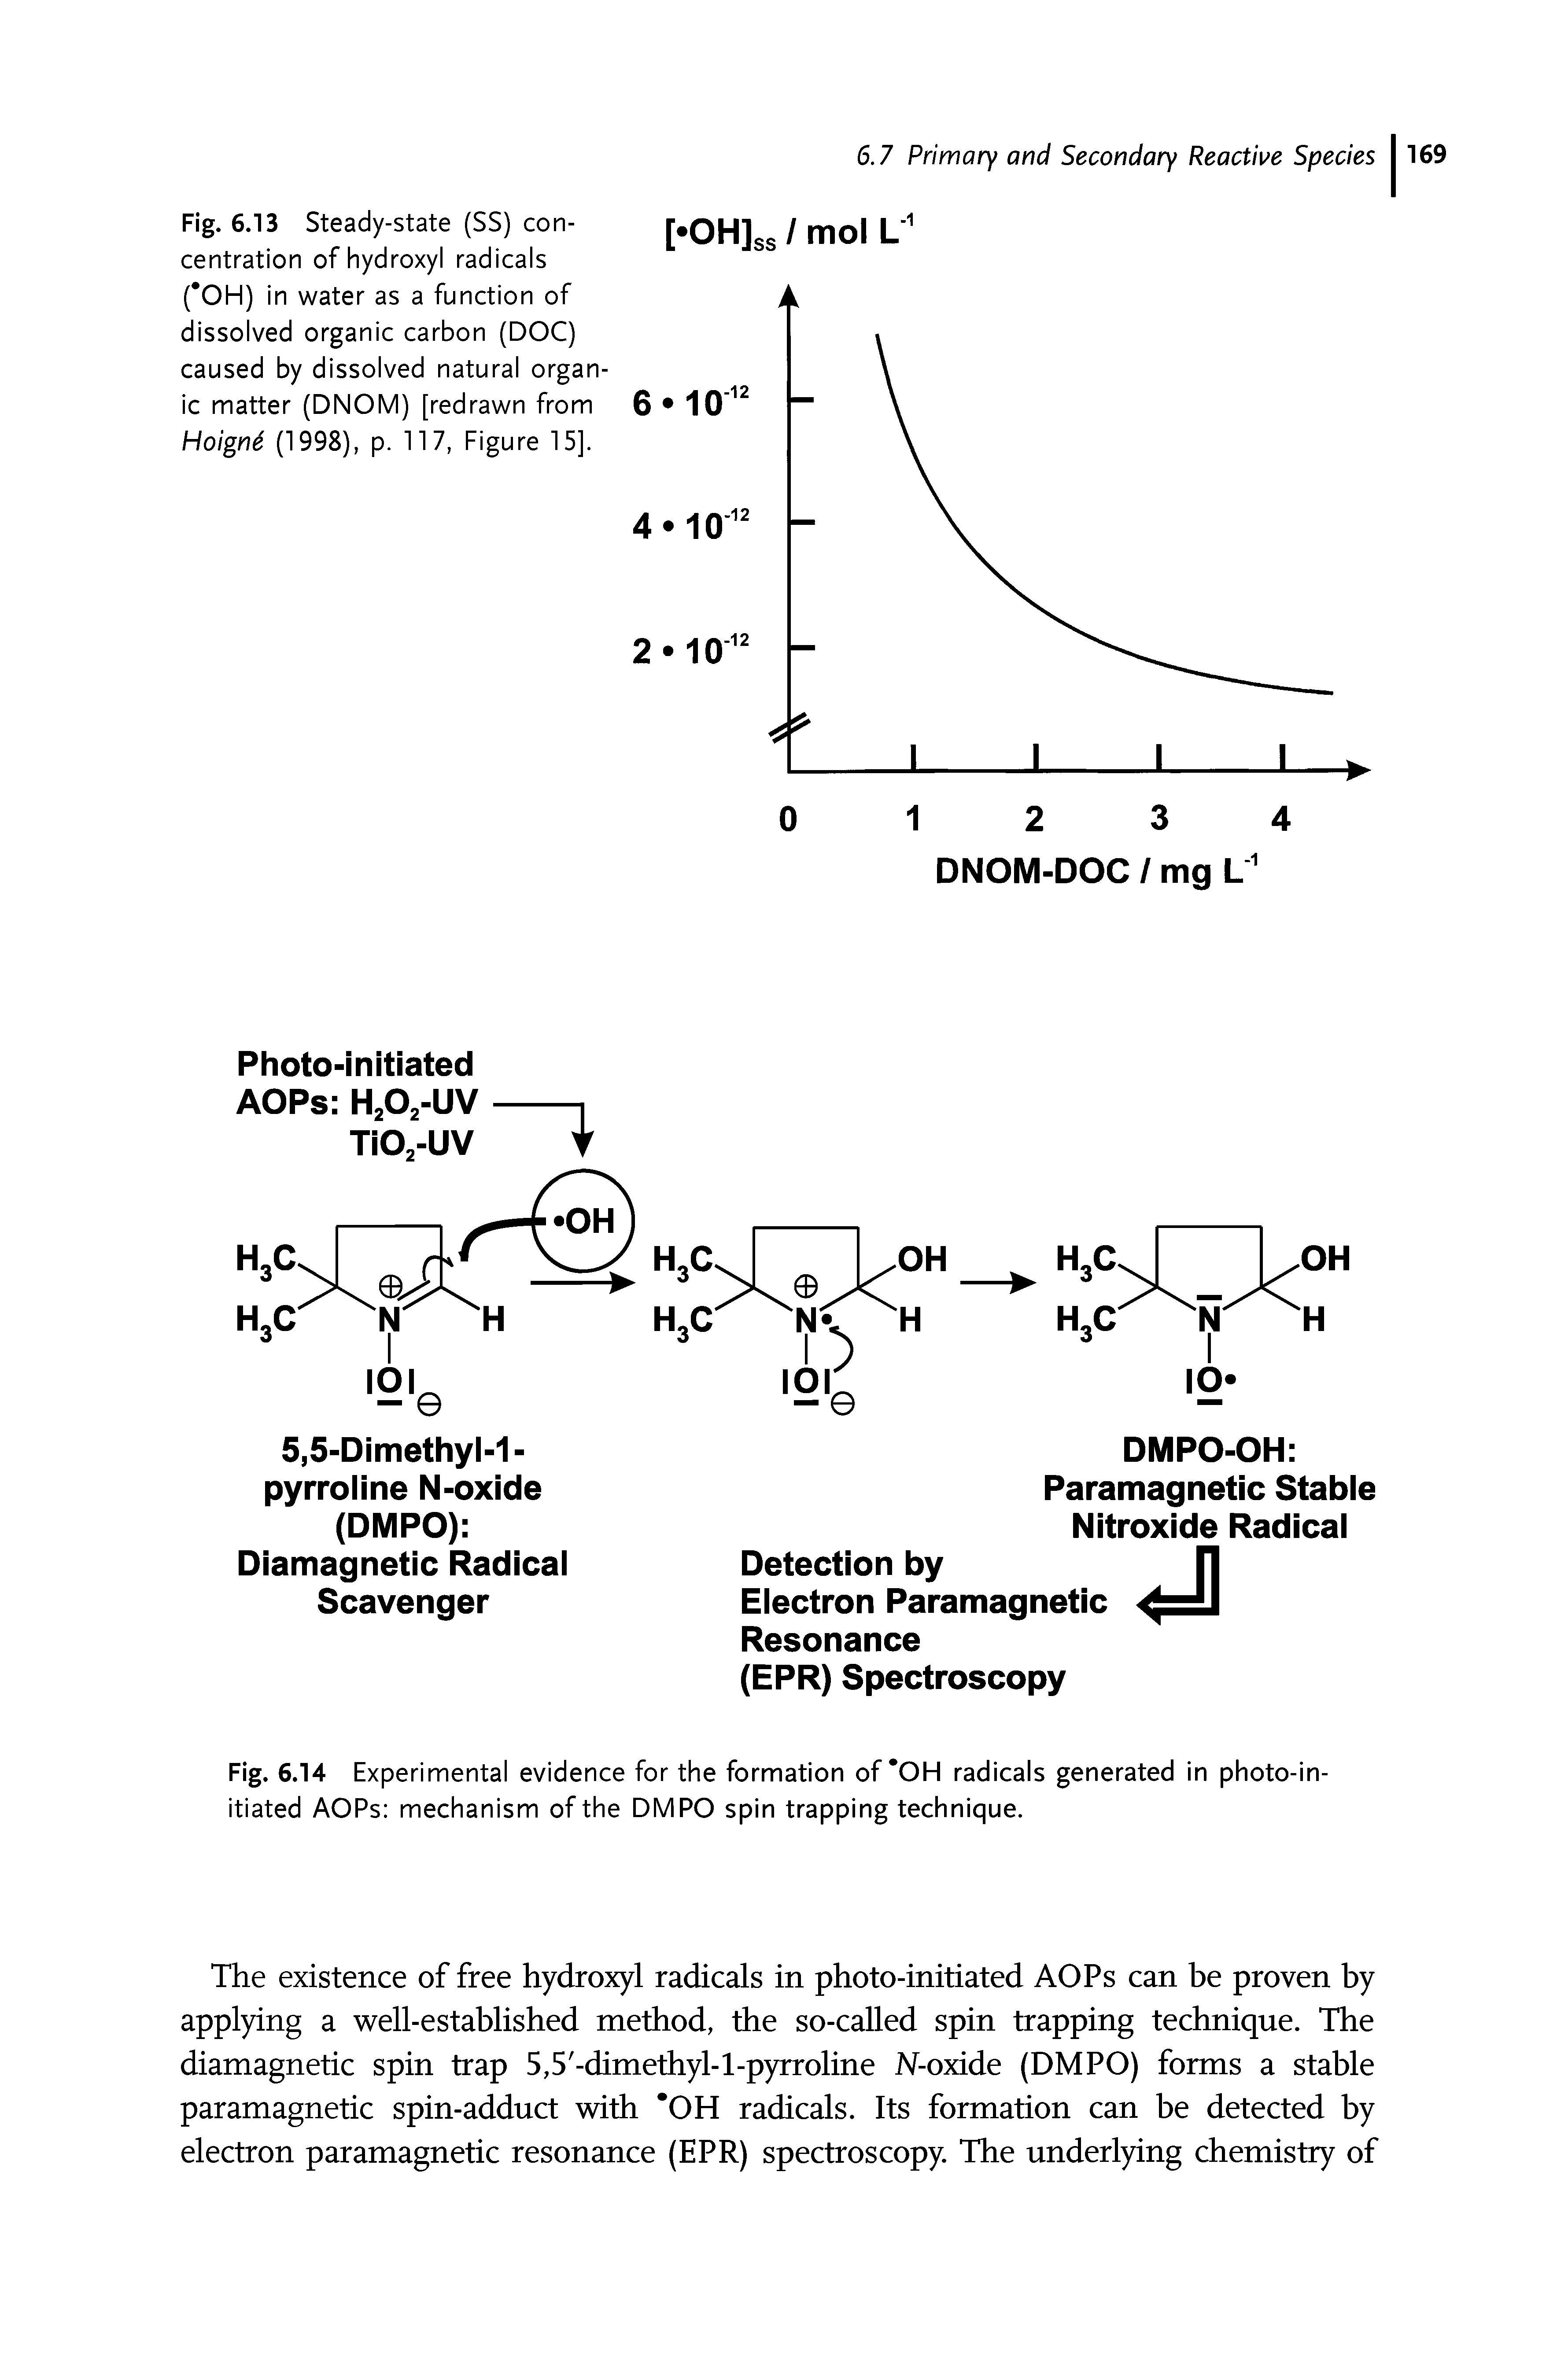 Fig. 6.14 Experimental evidence for the formation of OH radicals generated in photo-initiated AOPs mechanism of the DMPO spin trapping technique.